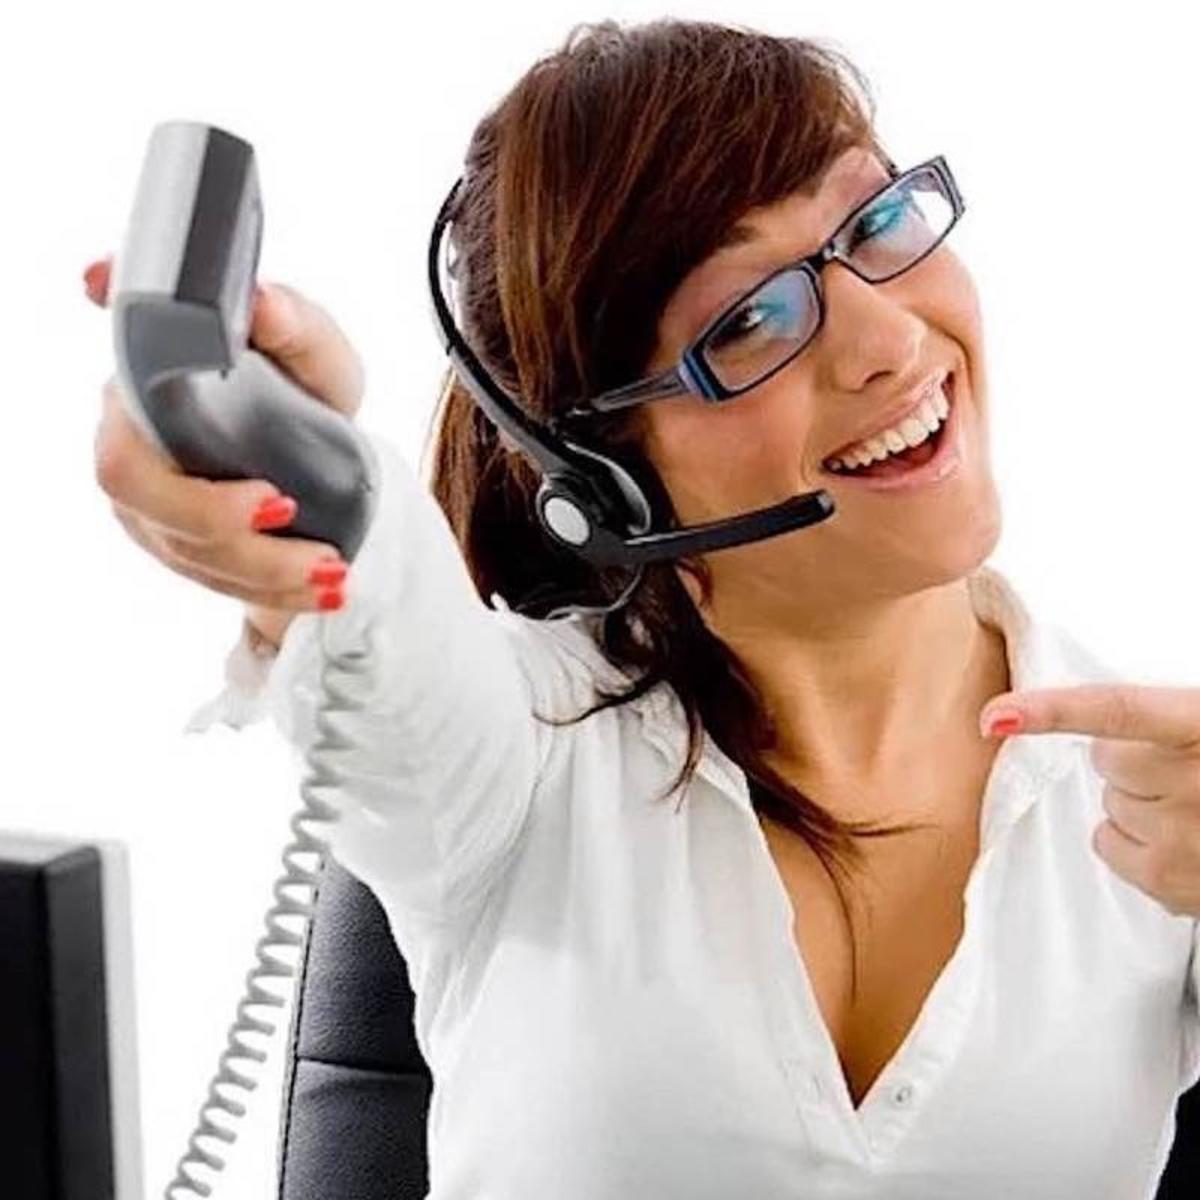 Business personnel are glad to use a well-designed telephone system.